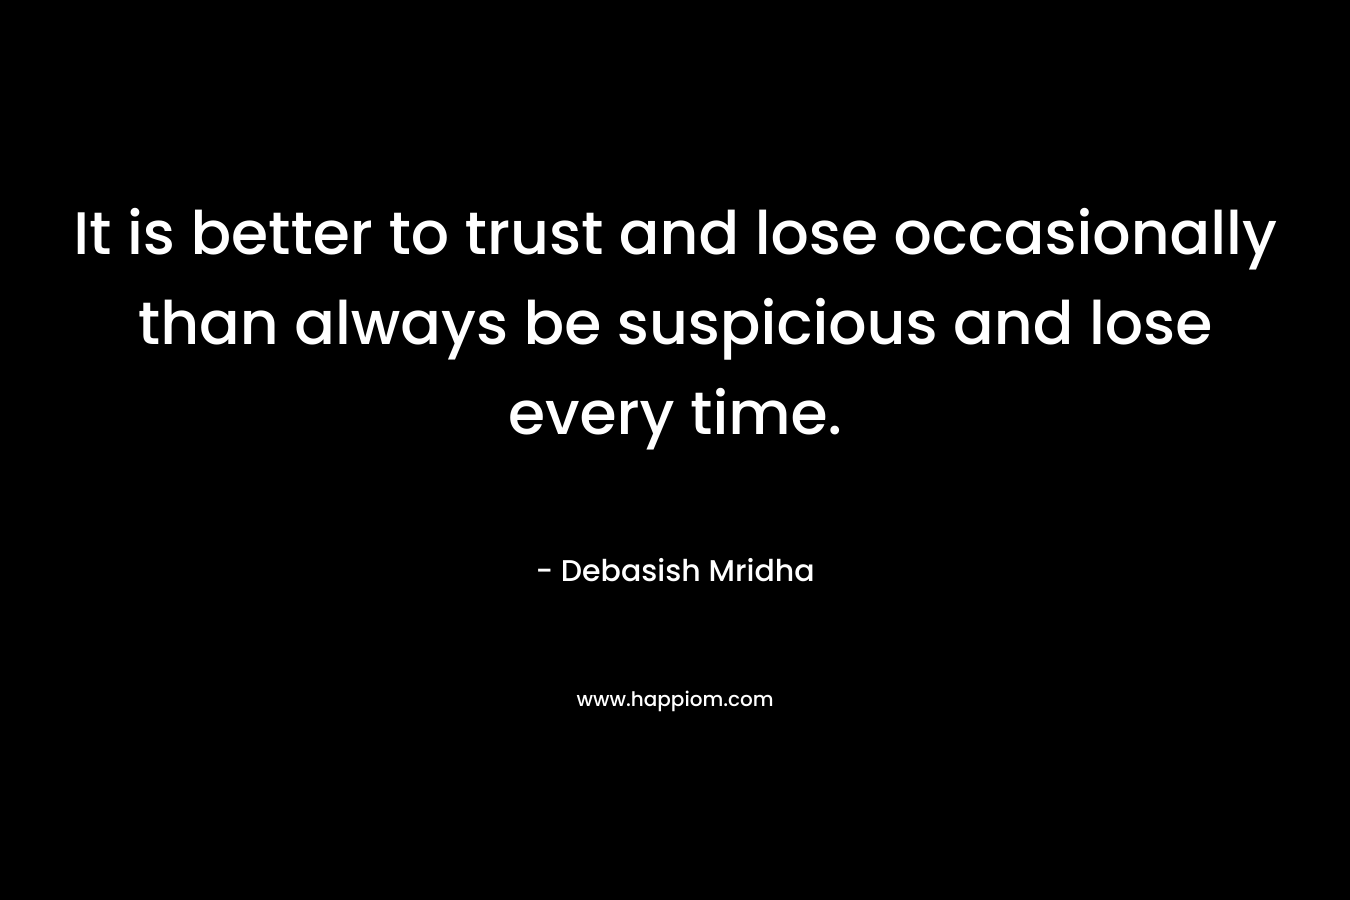 It is better to trust and lose occasionally than always be suspicious and lose every time.